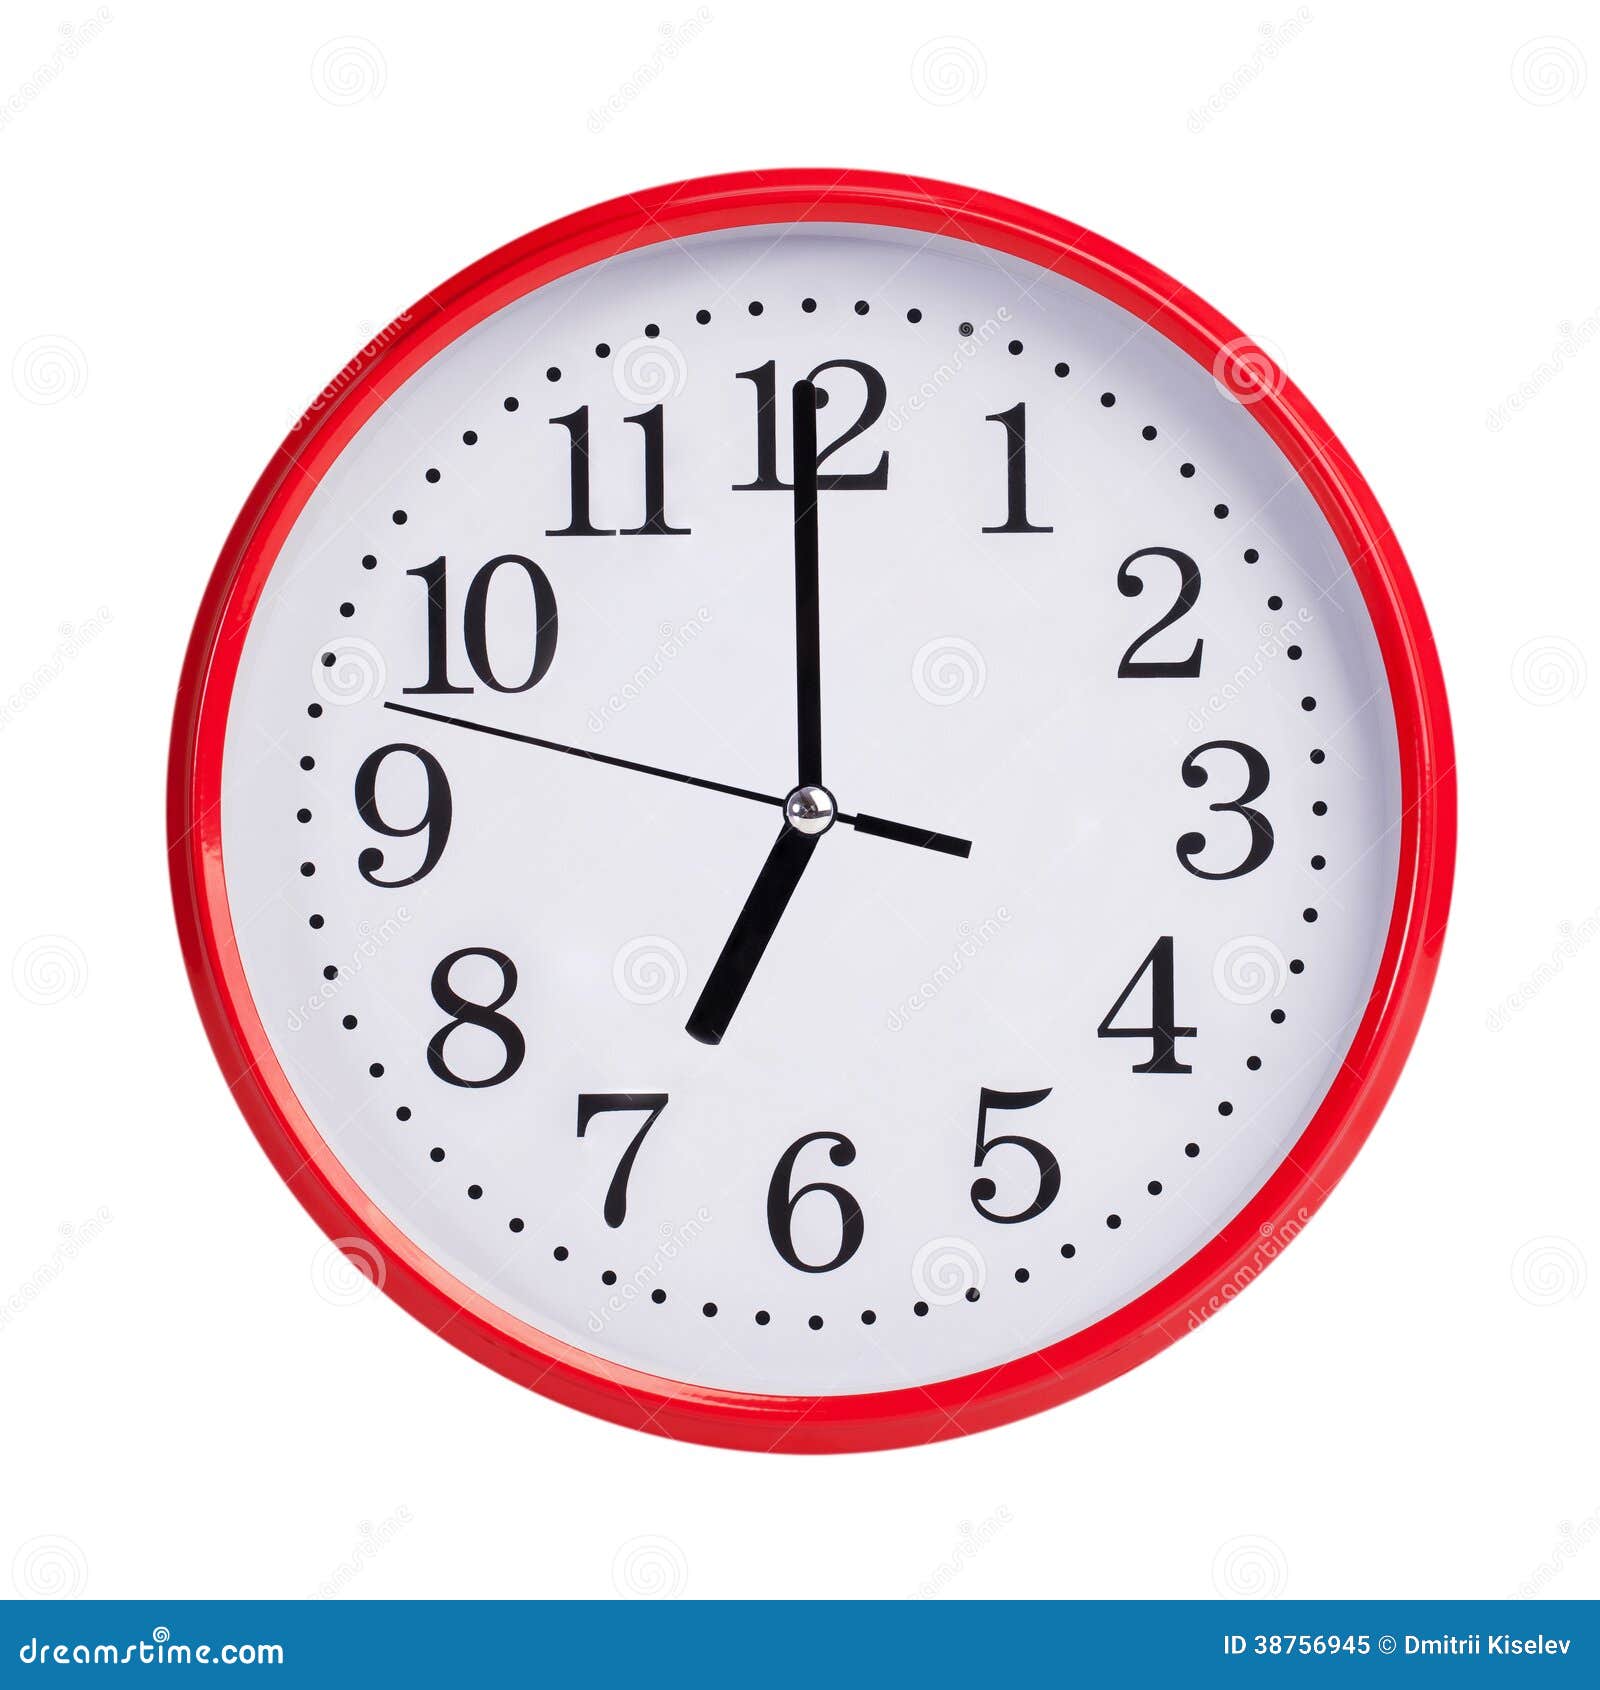 Seven Hours On A Round Dial Stock Image - Image of timepiece, minute How Many Minutes Is In 7 Hours